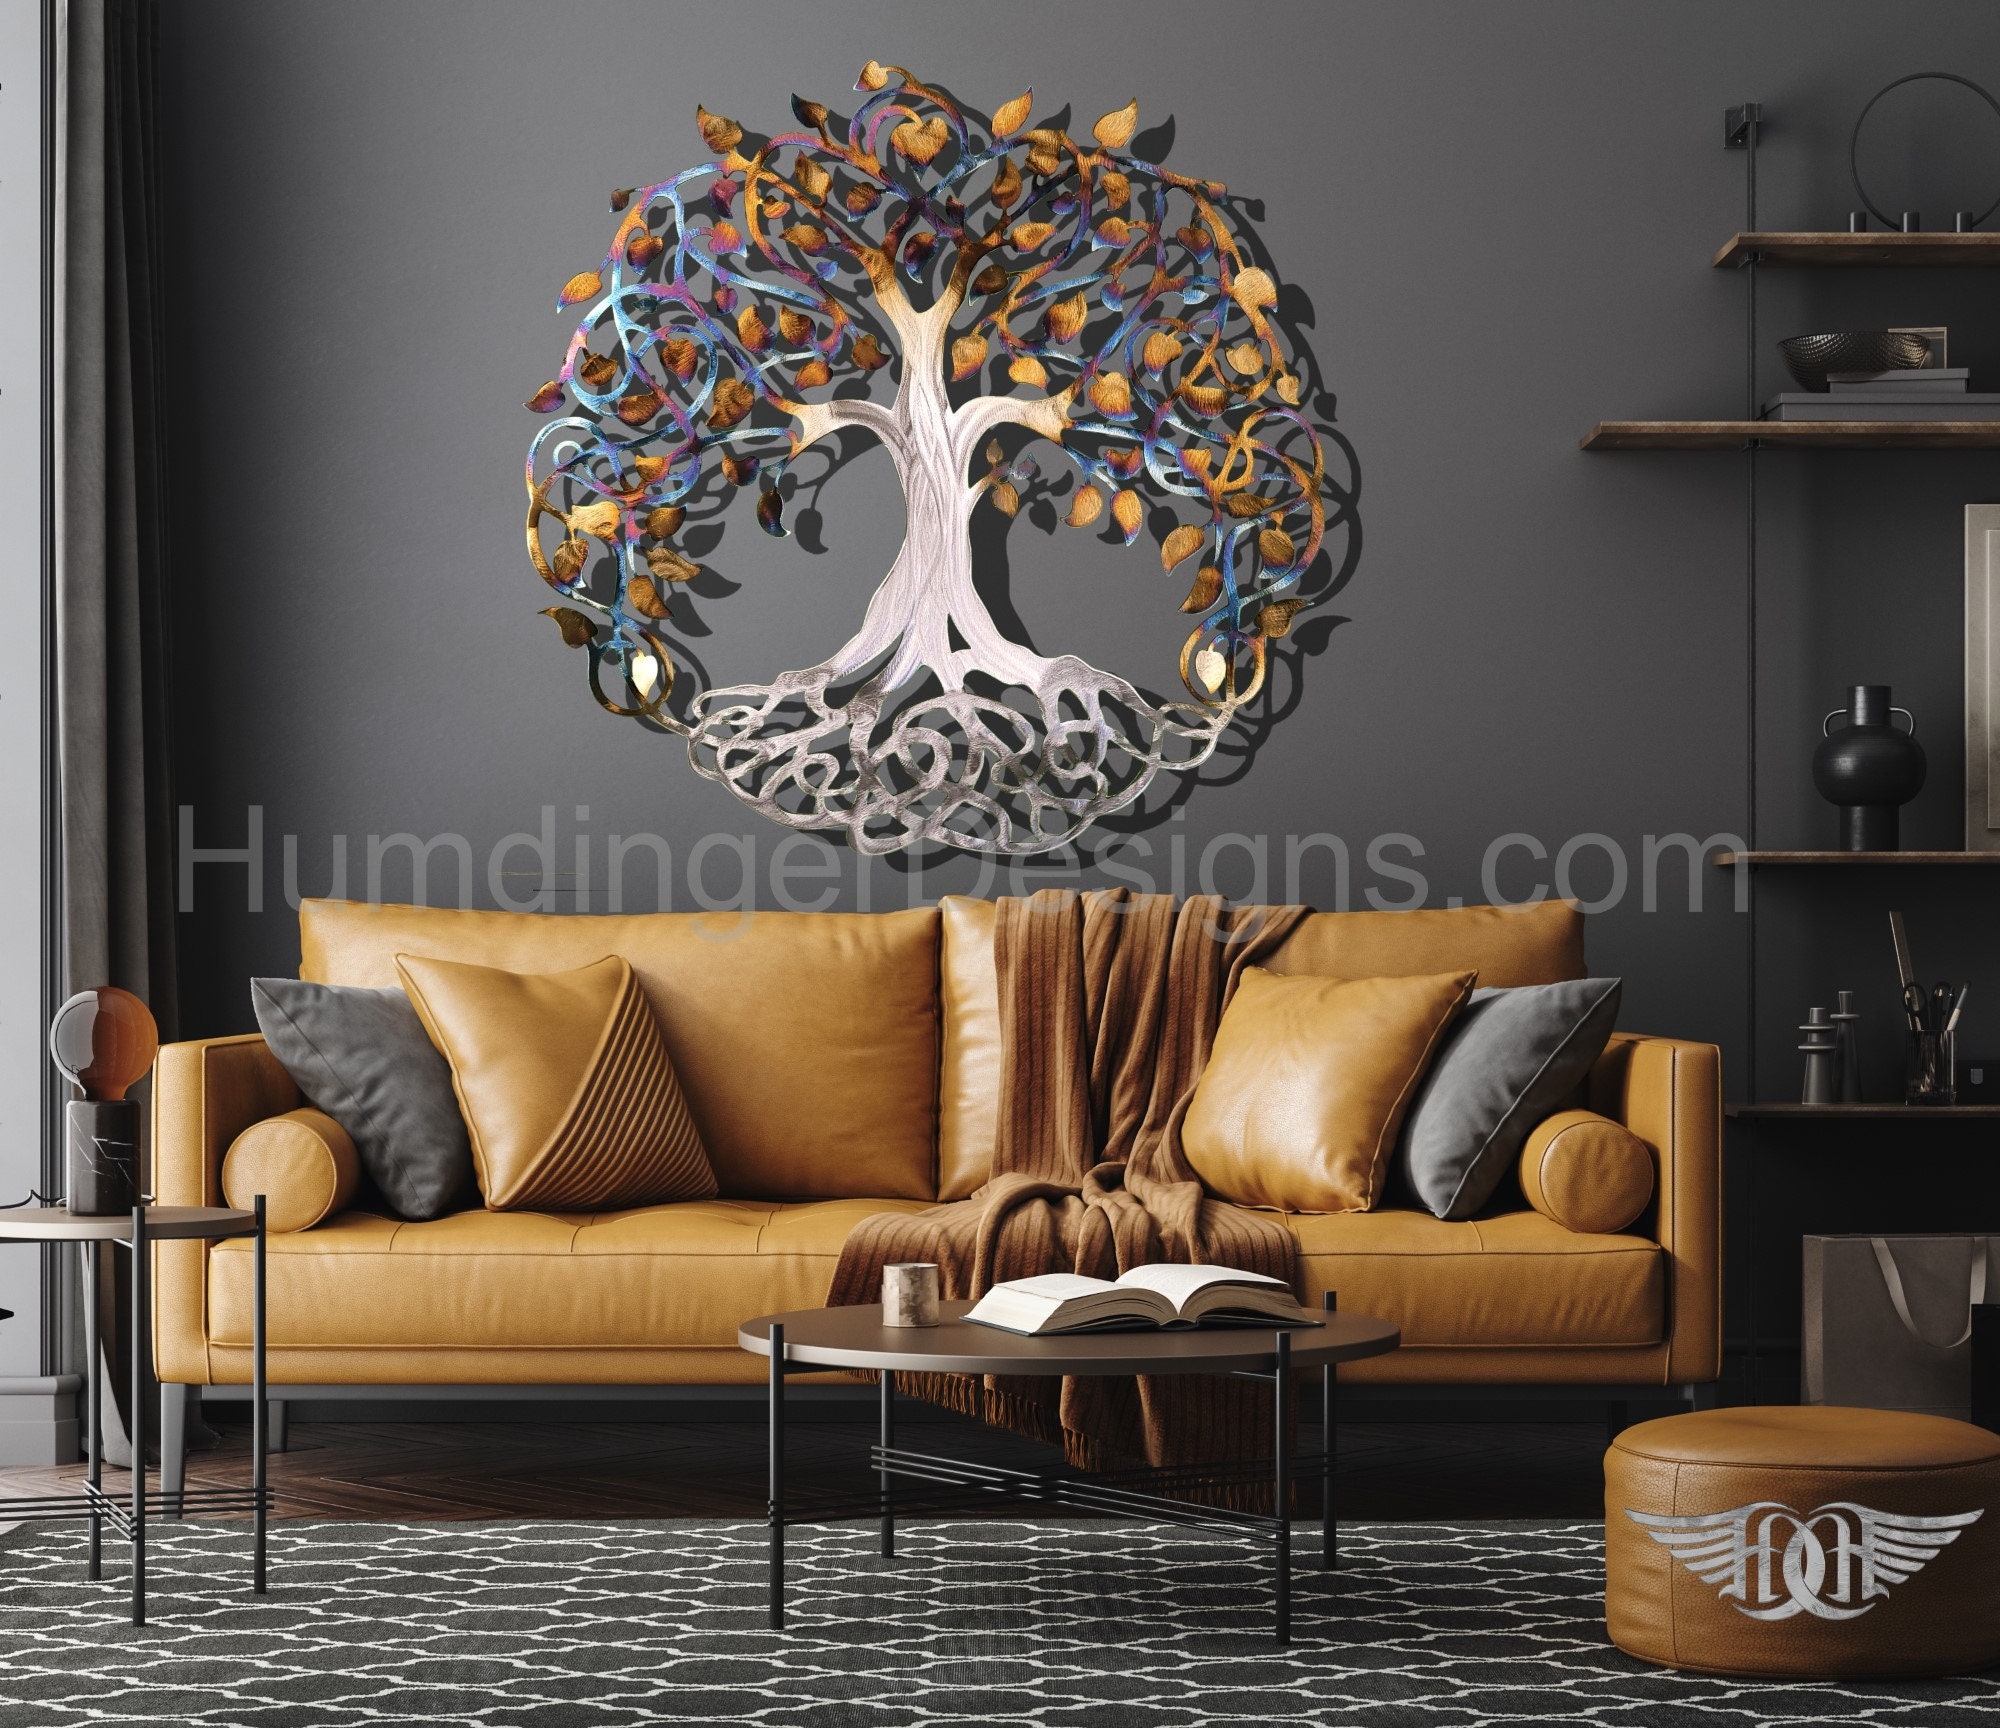 Large Metal Wall Art Stainless Steel Infinity Tree of Life Wall